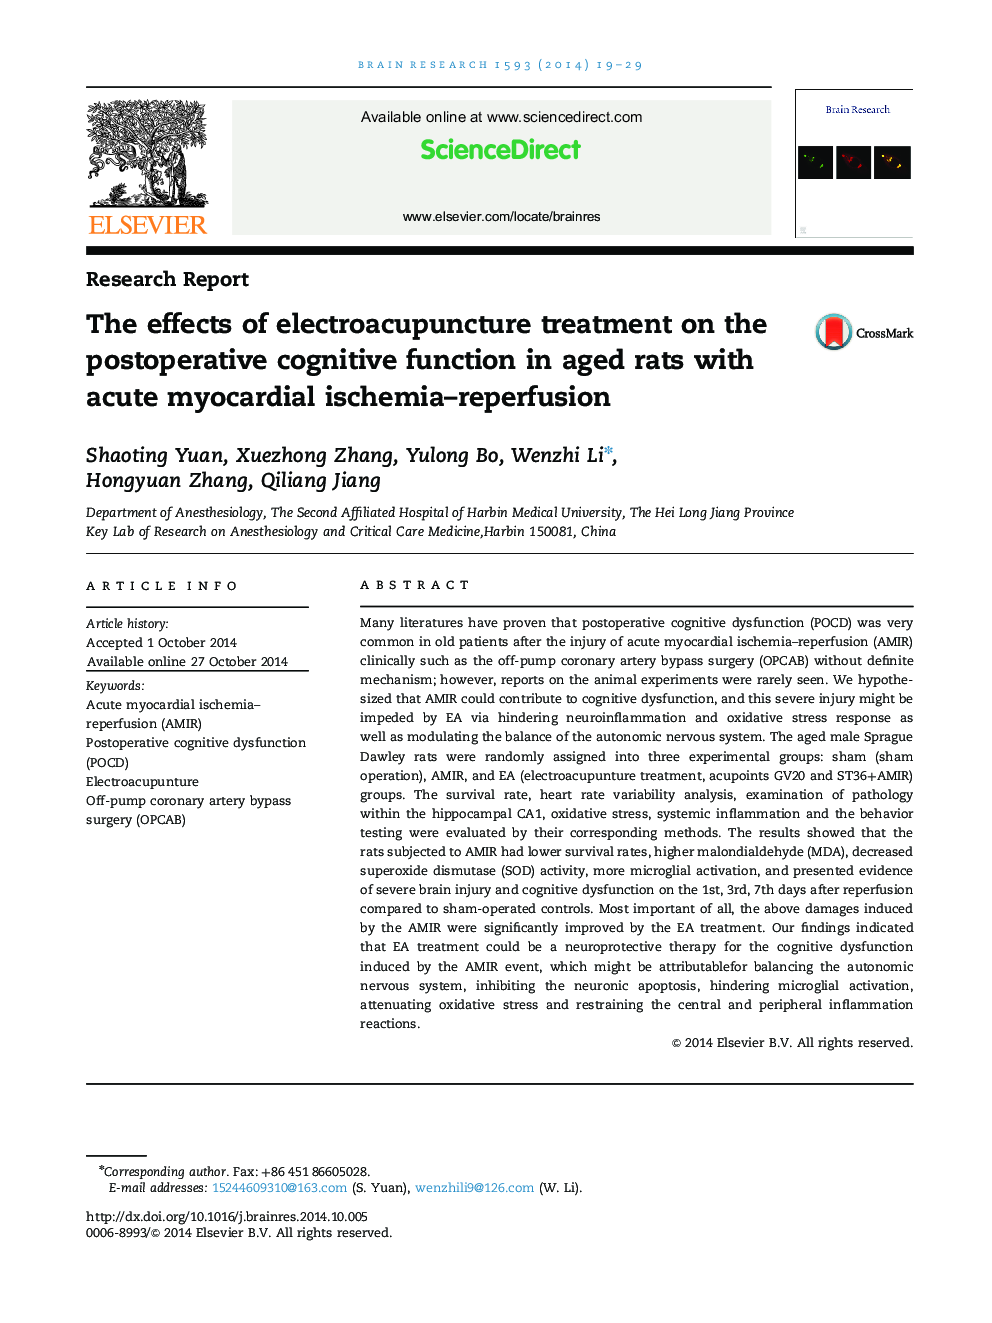 The effects of electroacupuncture treatment on the postoperative cognitive function in aged rats with acute myocardial ischemia–reperfusion